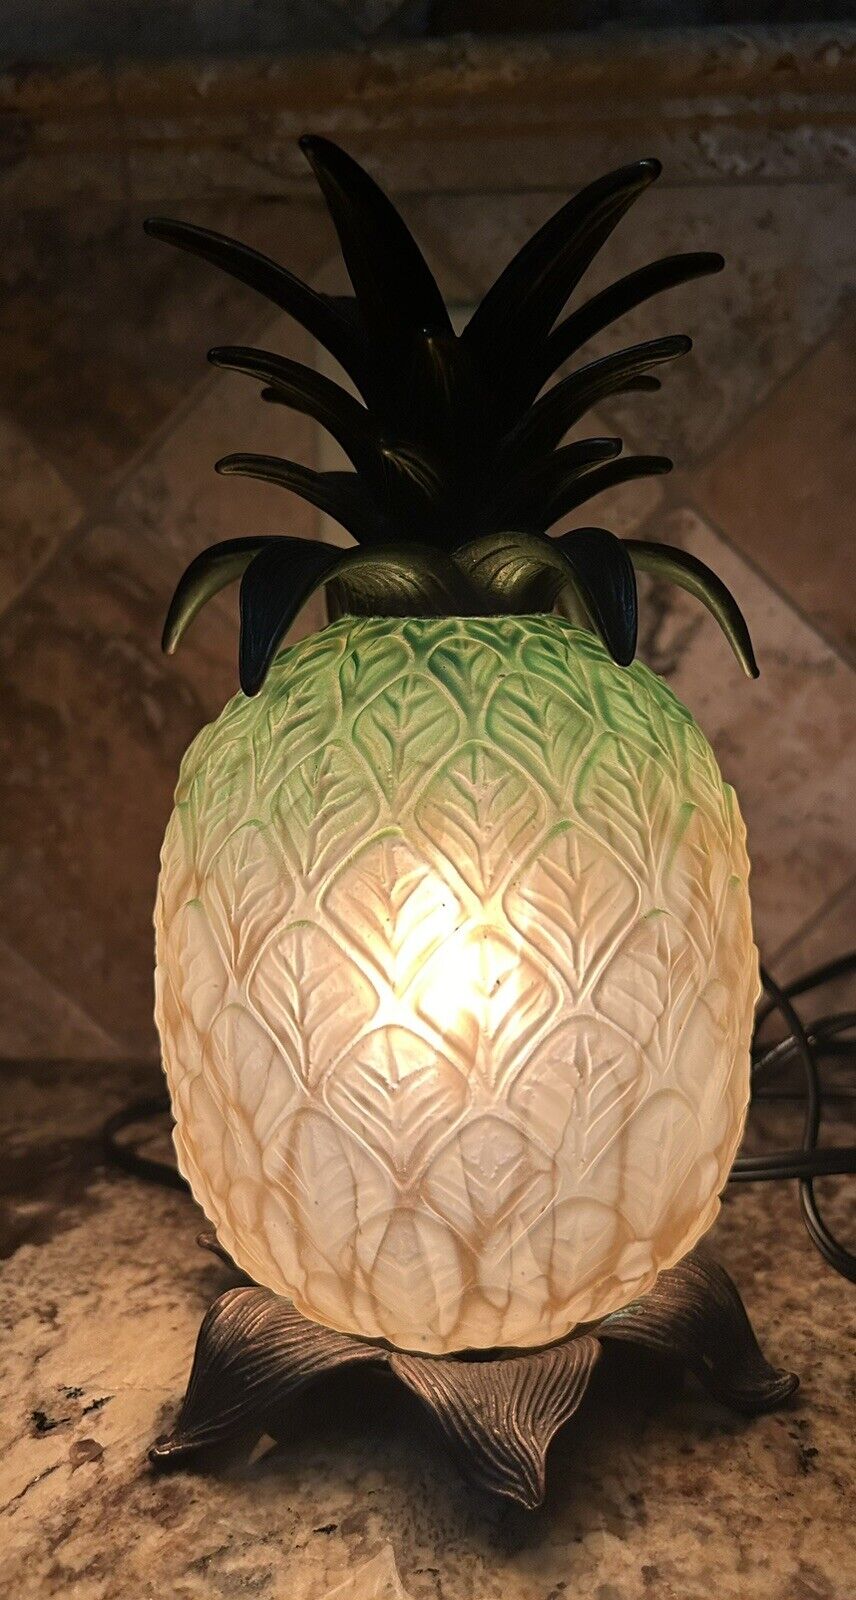 Vintage Brass and Art Glass Pineapple Lamp Andrea by Sadek Stamped Original RARE